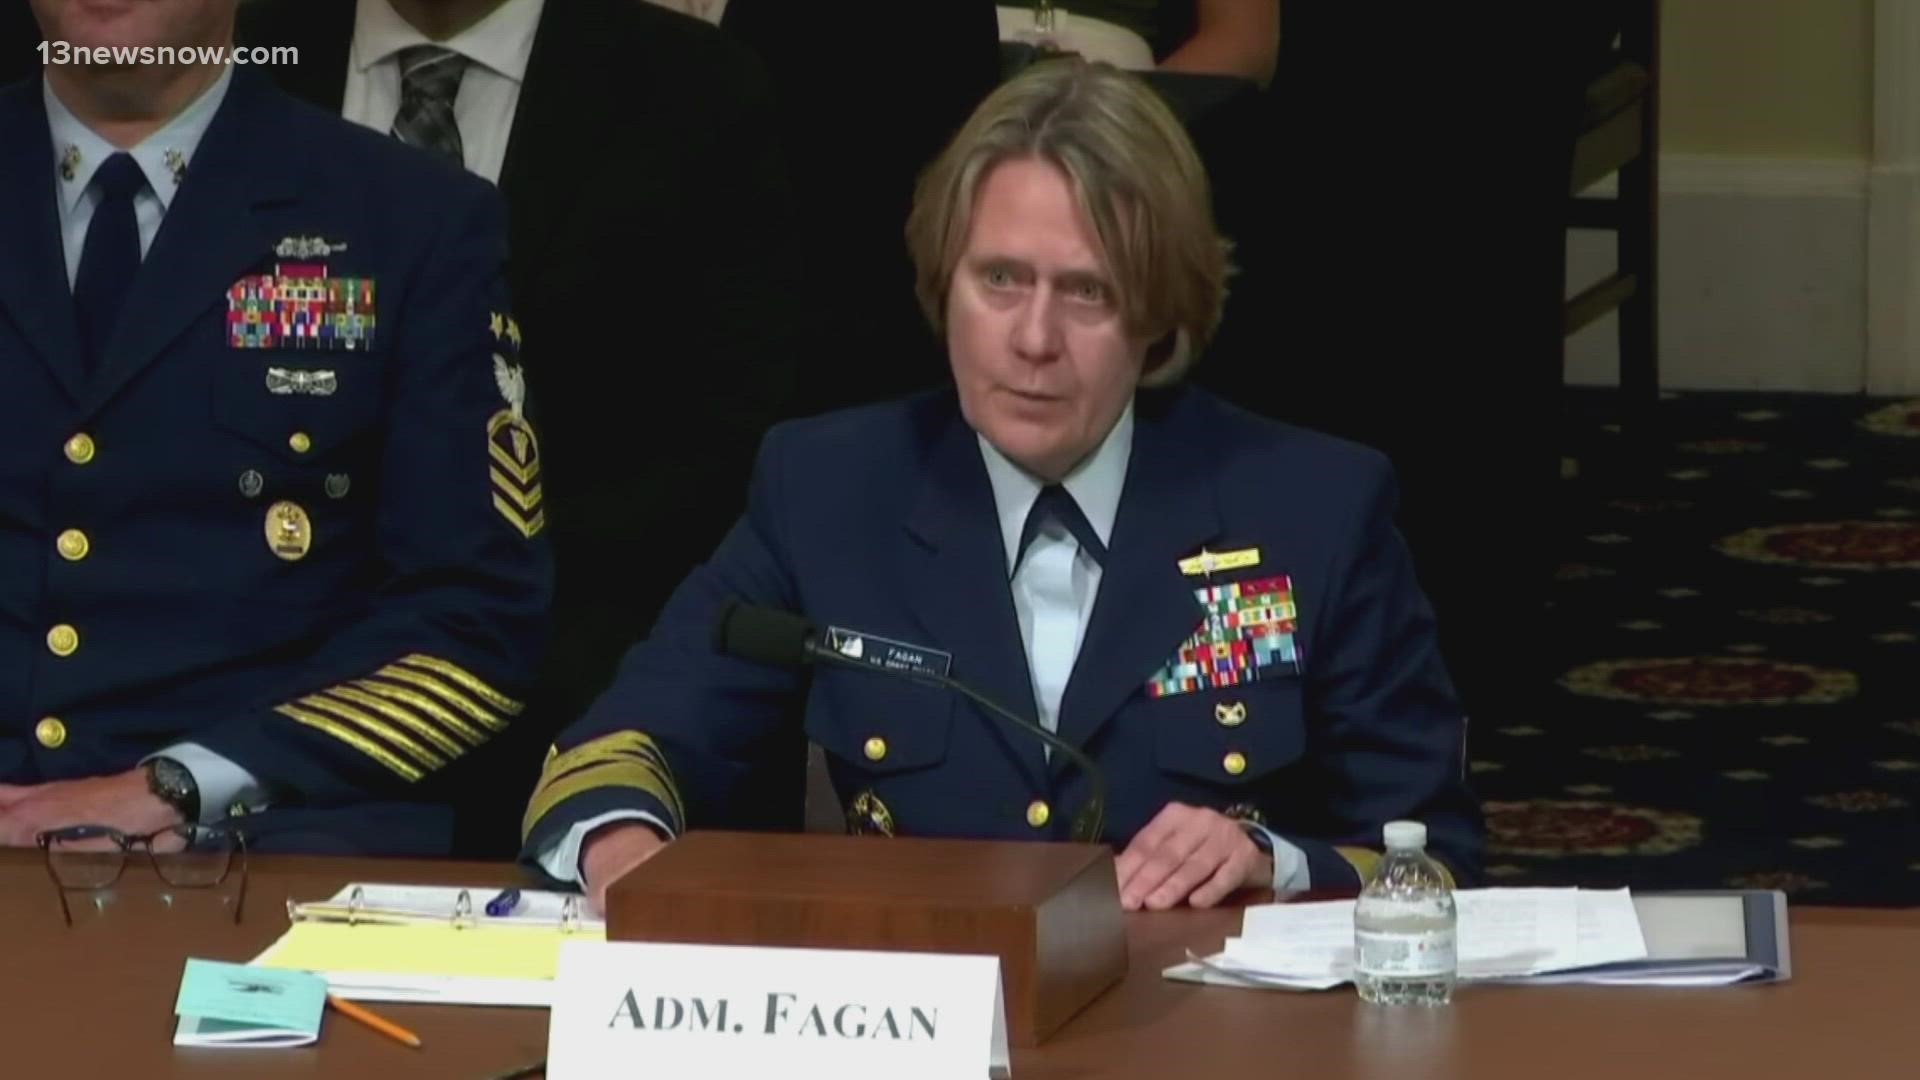 The Coast Guard's top Admiral faced some tough questions on Capitol Hill.